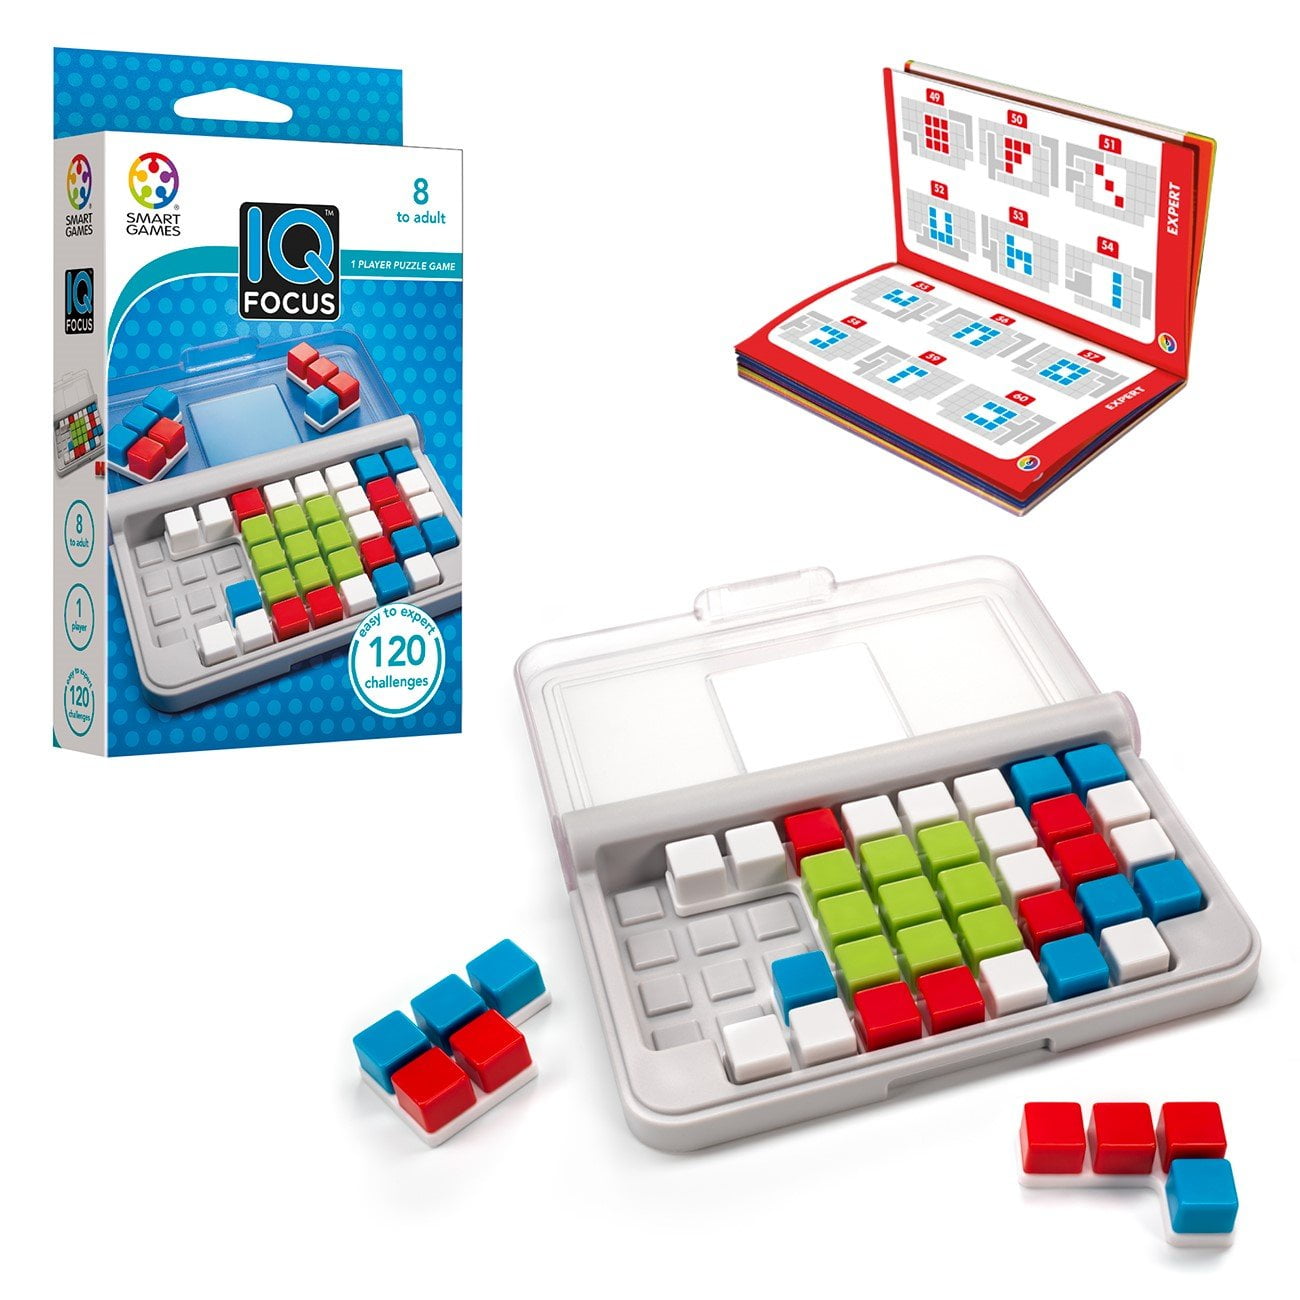 Focus Skill-Building Travel Game For Ages 8 - Adult - Walmart.com